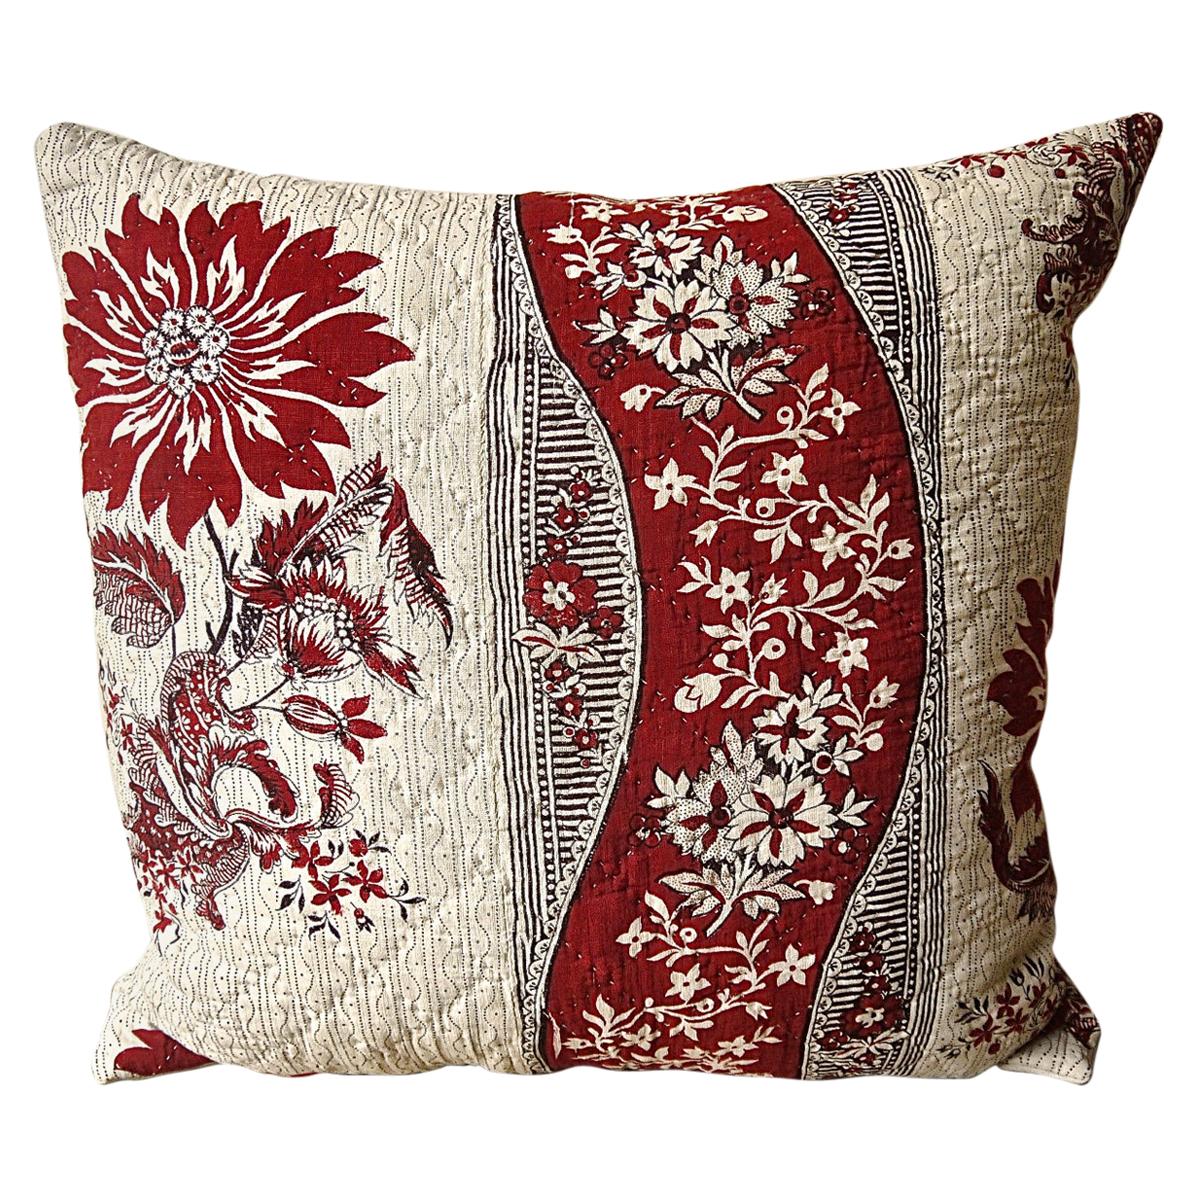 Red and White Stylised Flower Block Printed Cotton Pillow, French, 18th Century For Sale